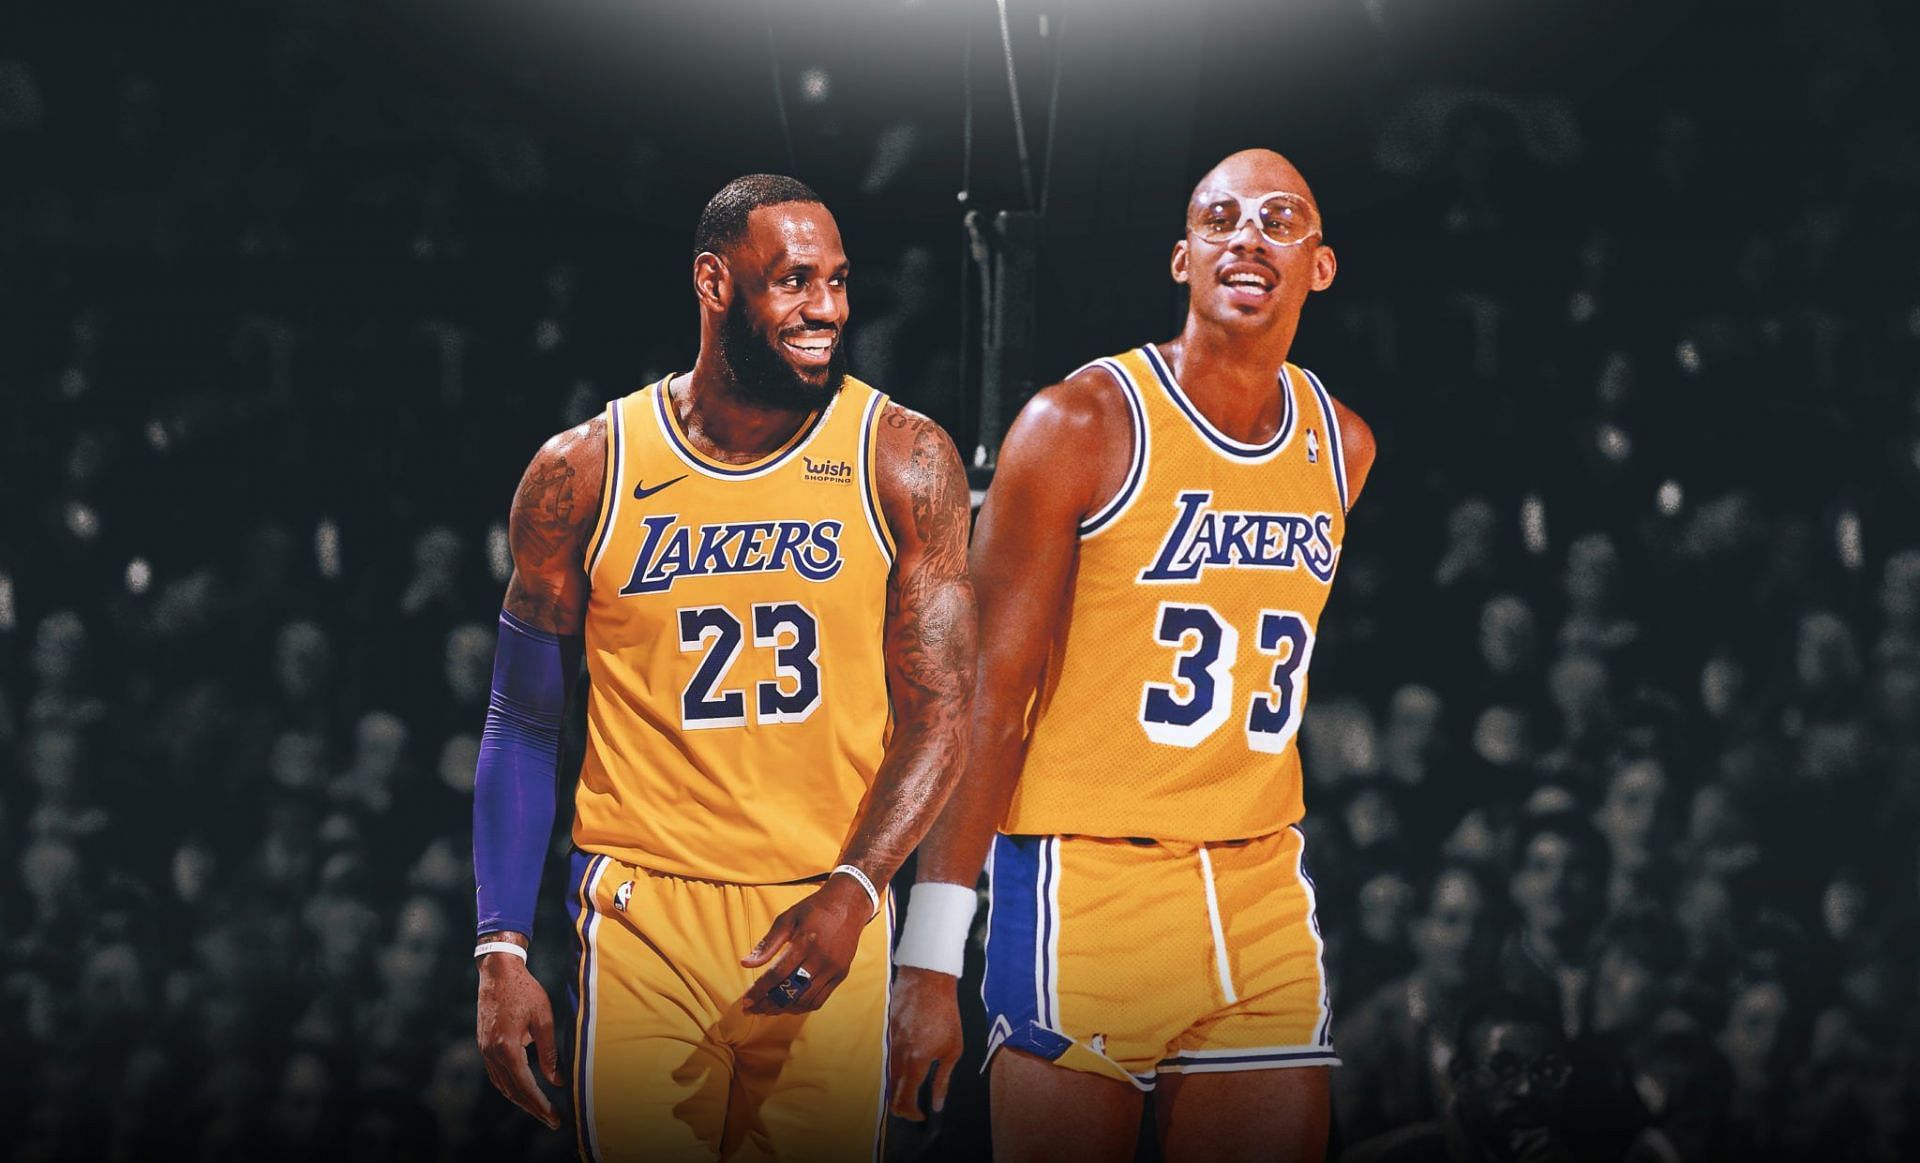 Lakers Media Day: The quest to return to greatness